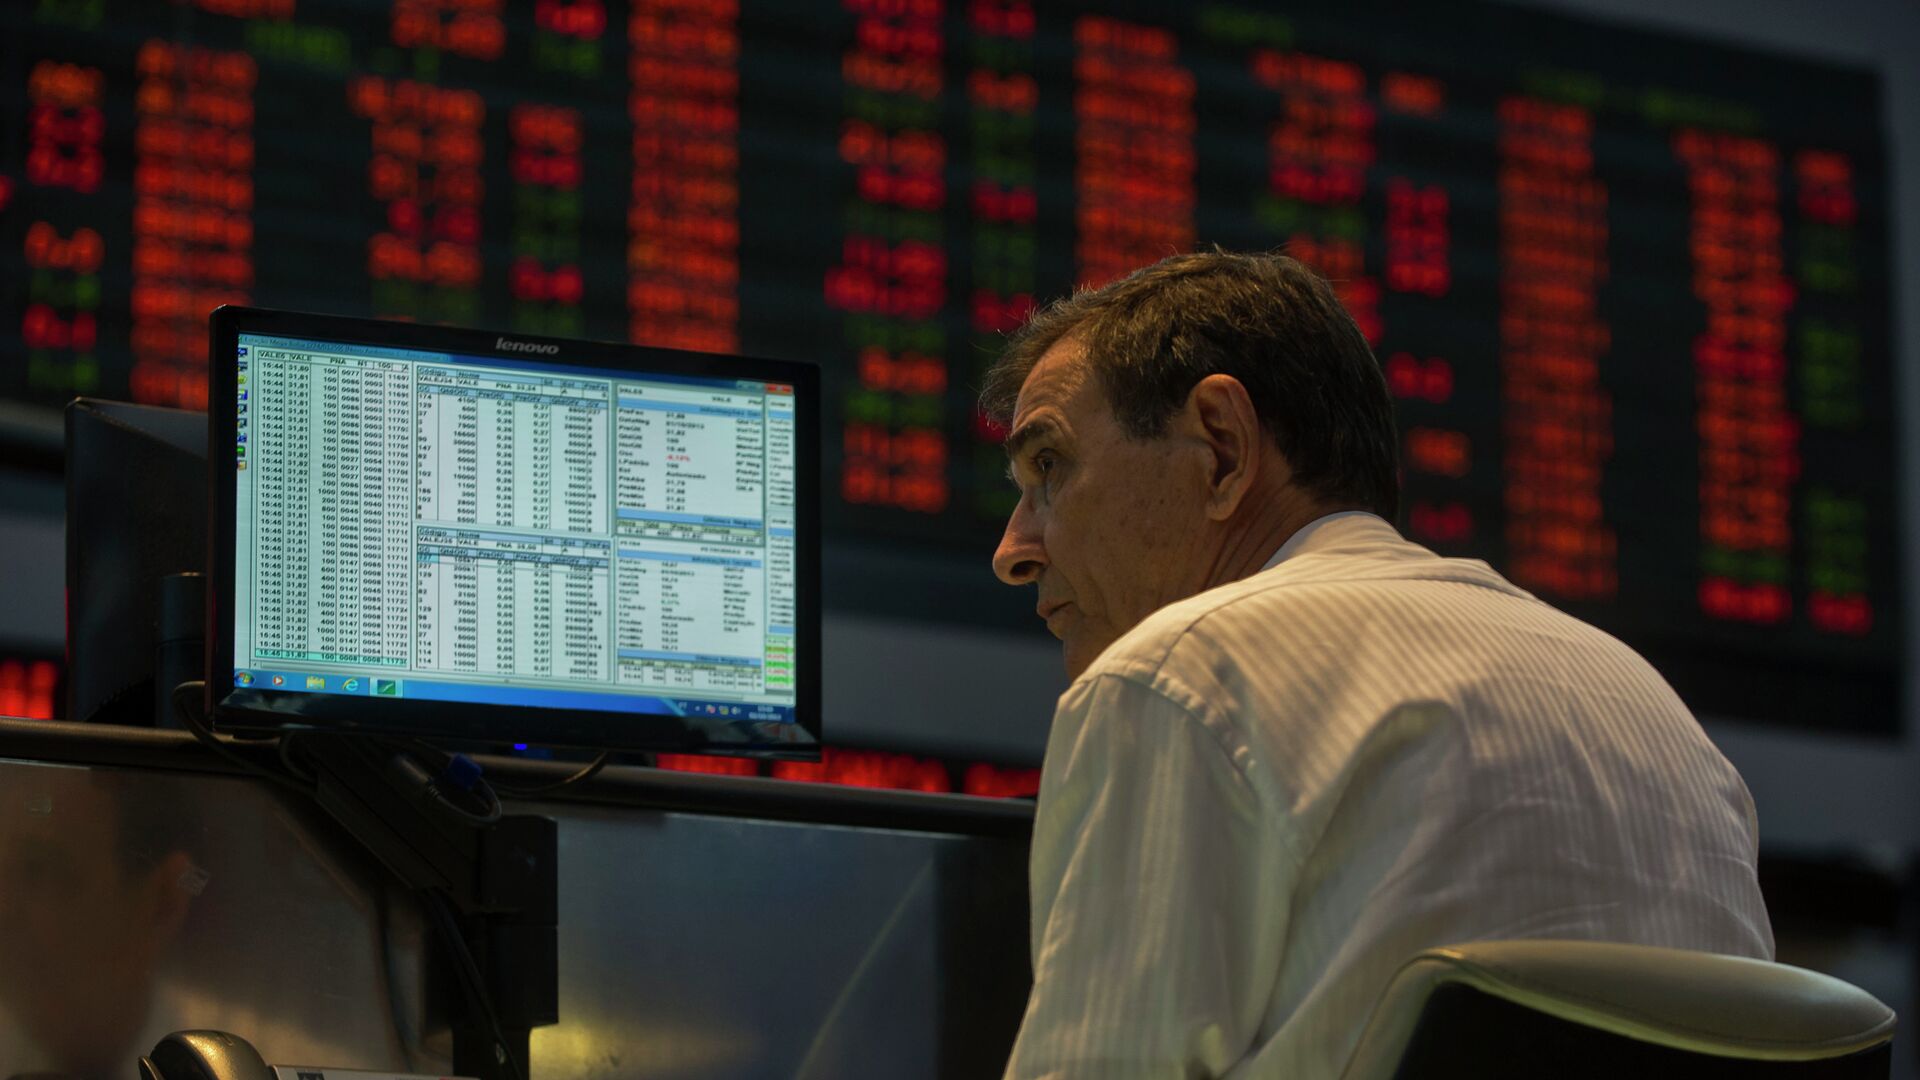 A system operator at Sao Paulo's Stock Exchange (Bovespa) looks at a monitor, in Sao Paulo, Brazil, on October 2, 2013.  - Sputnik Mundo, 1920, 30.12.2021